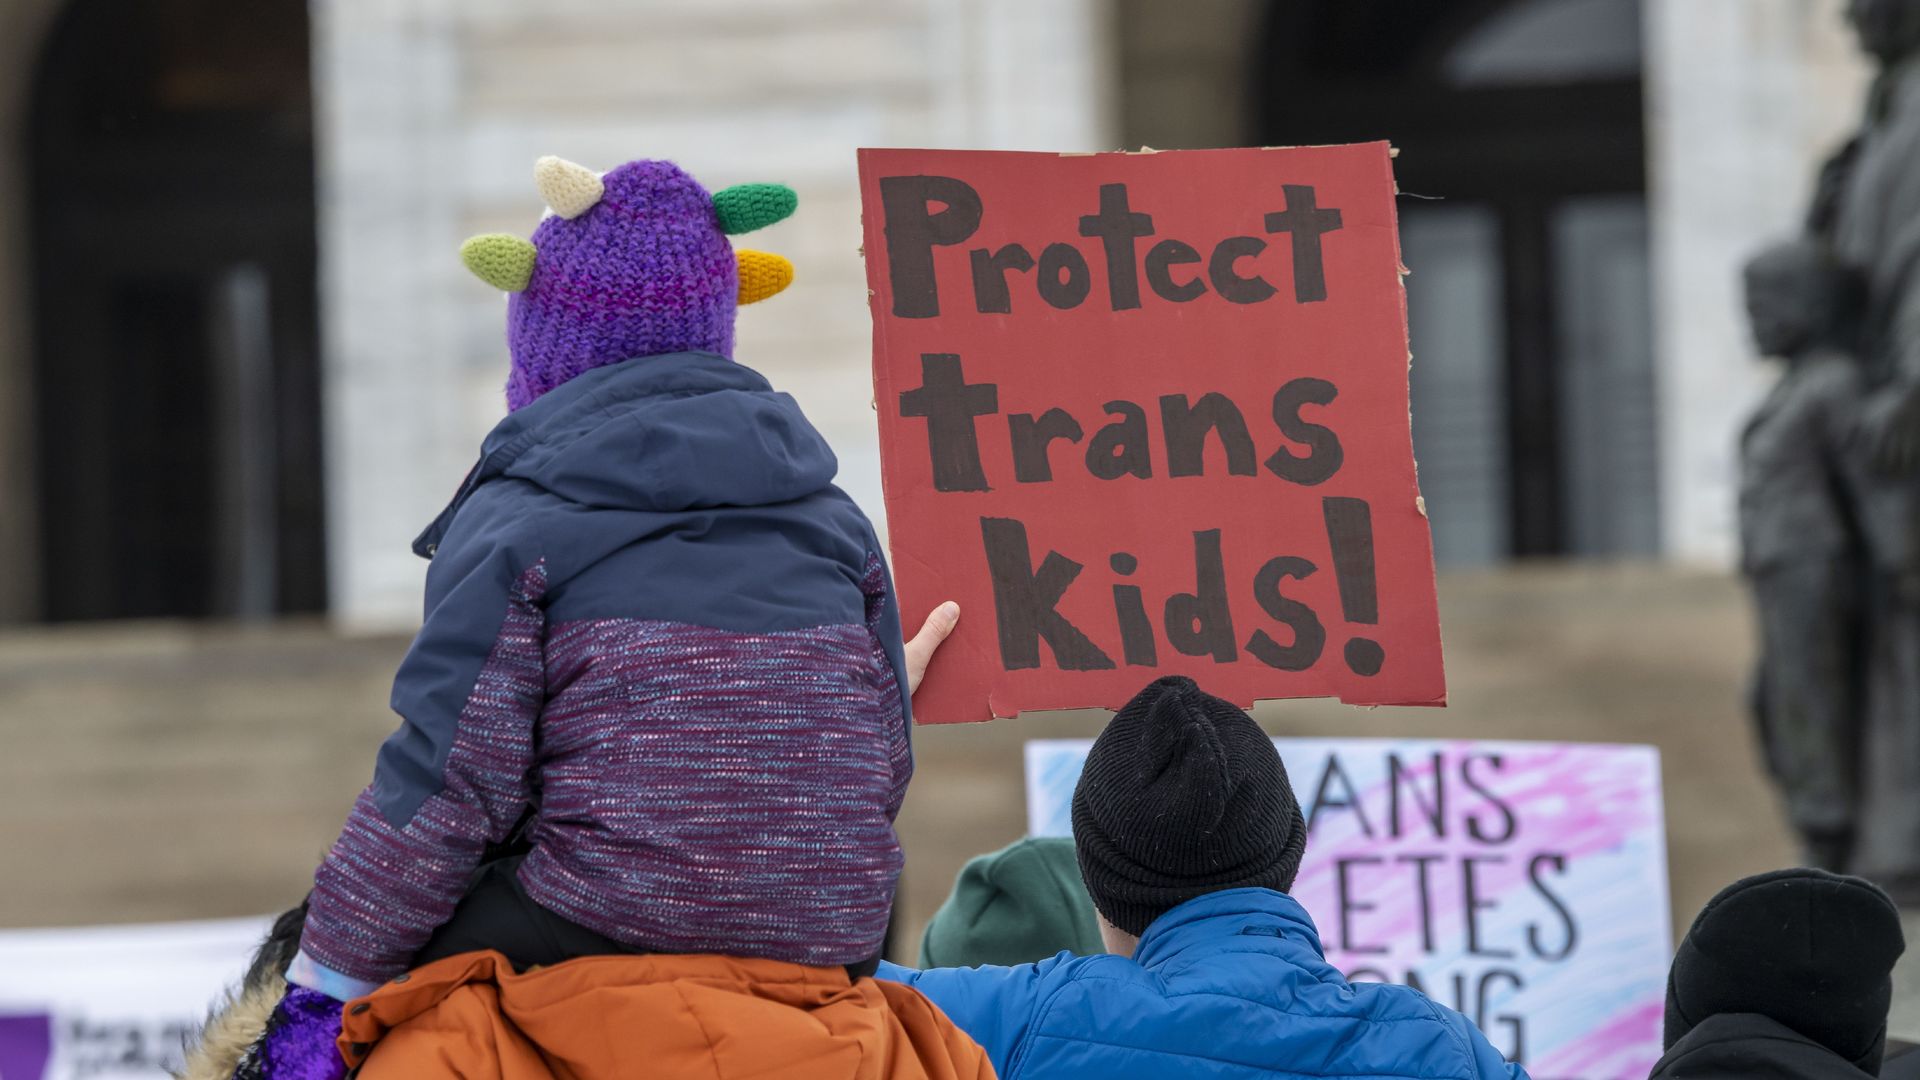 Picture of a sign that says "protect trans kids!"